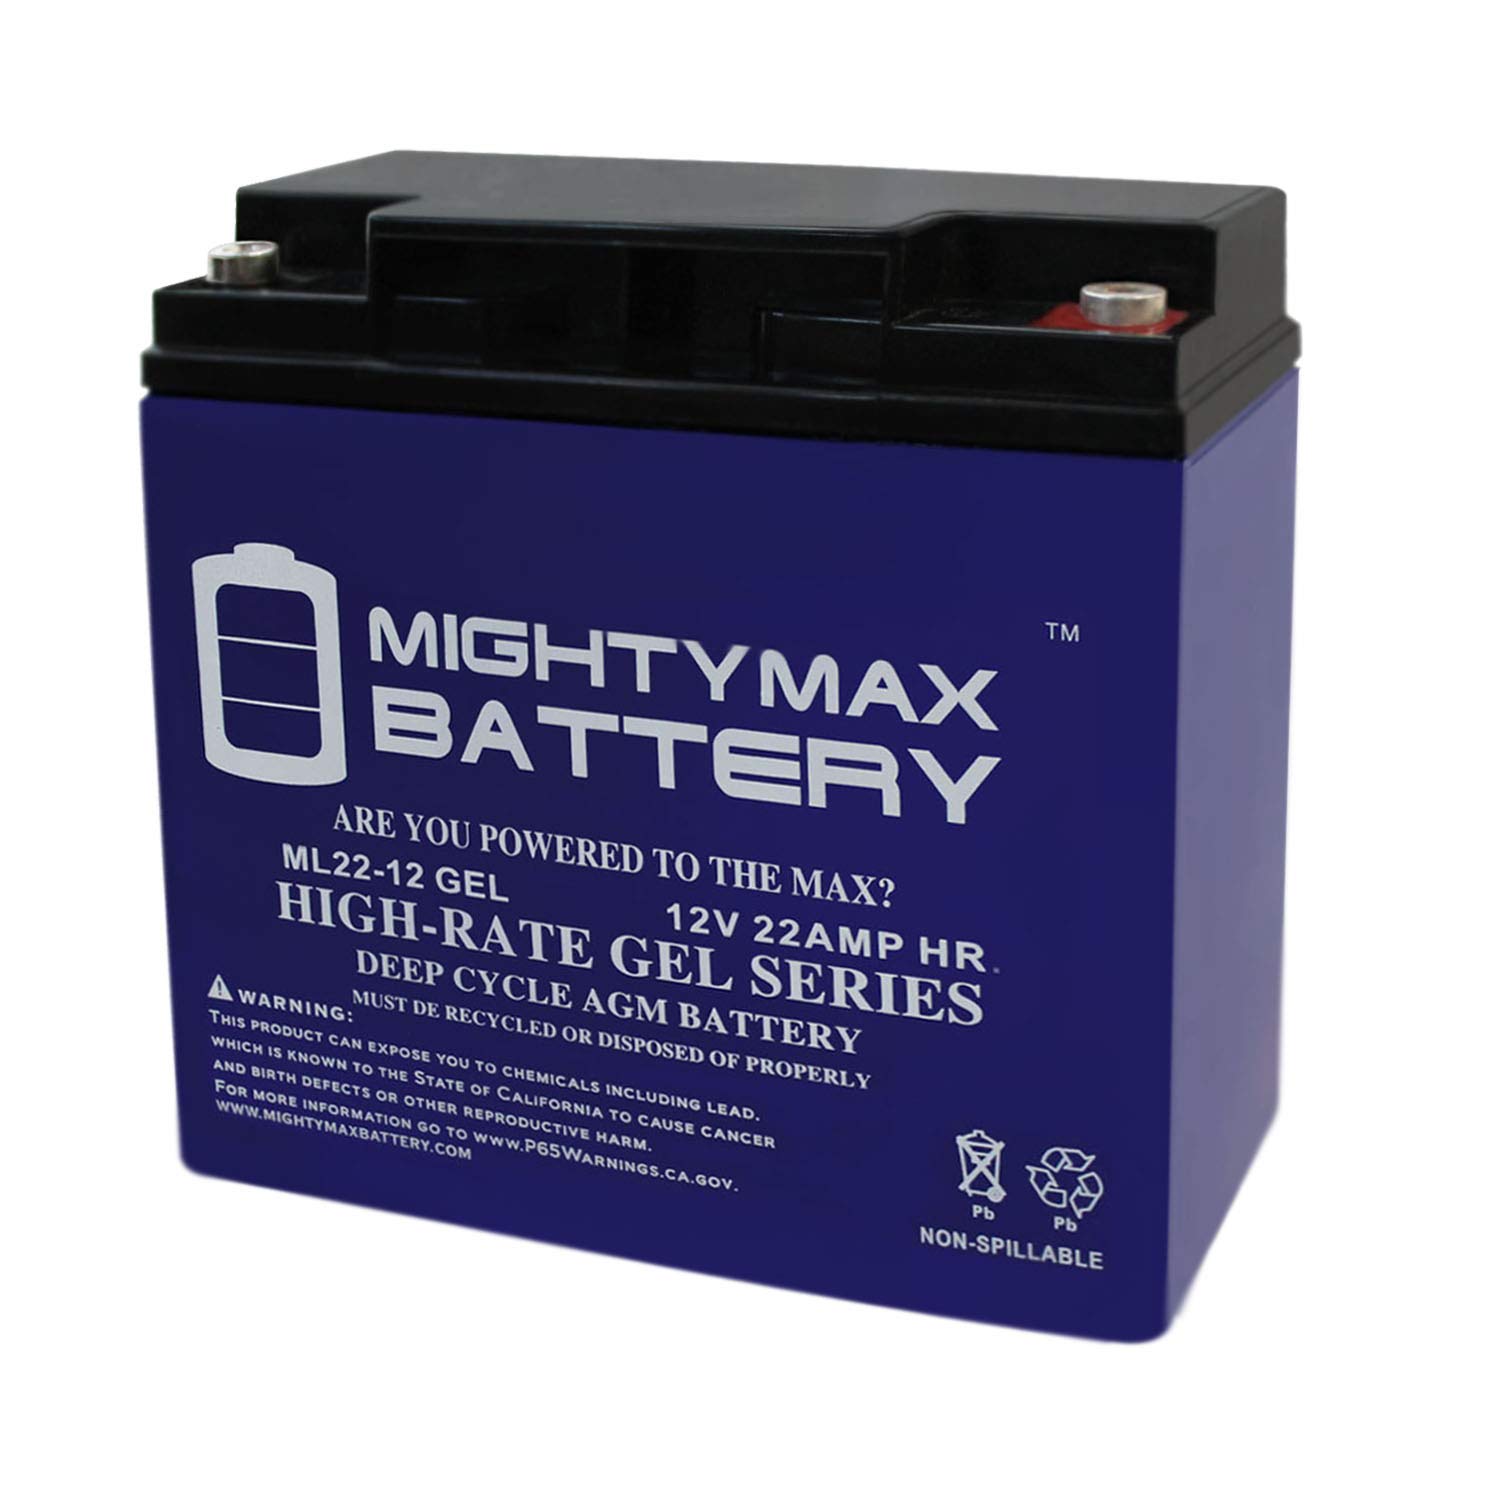 Mighty Max Battery Gel